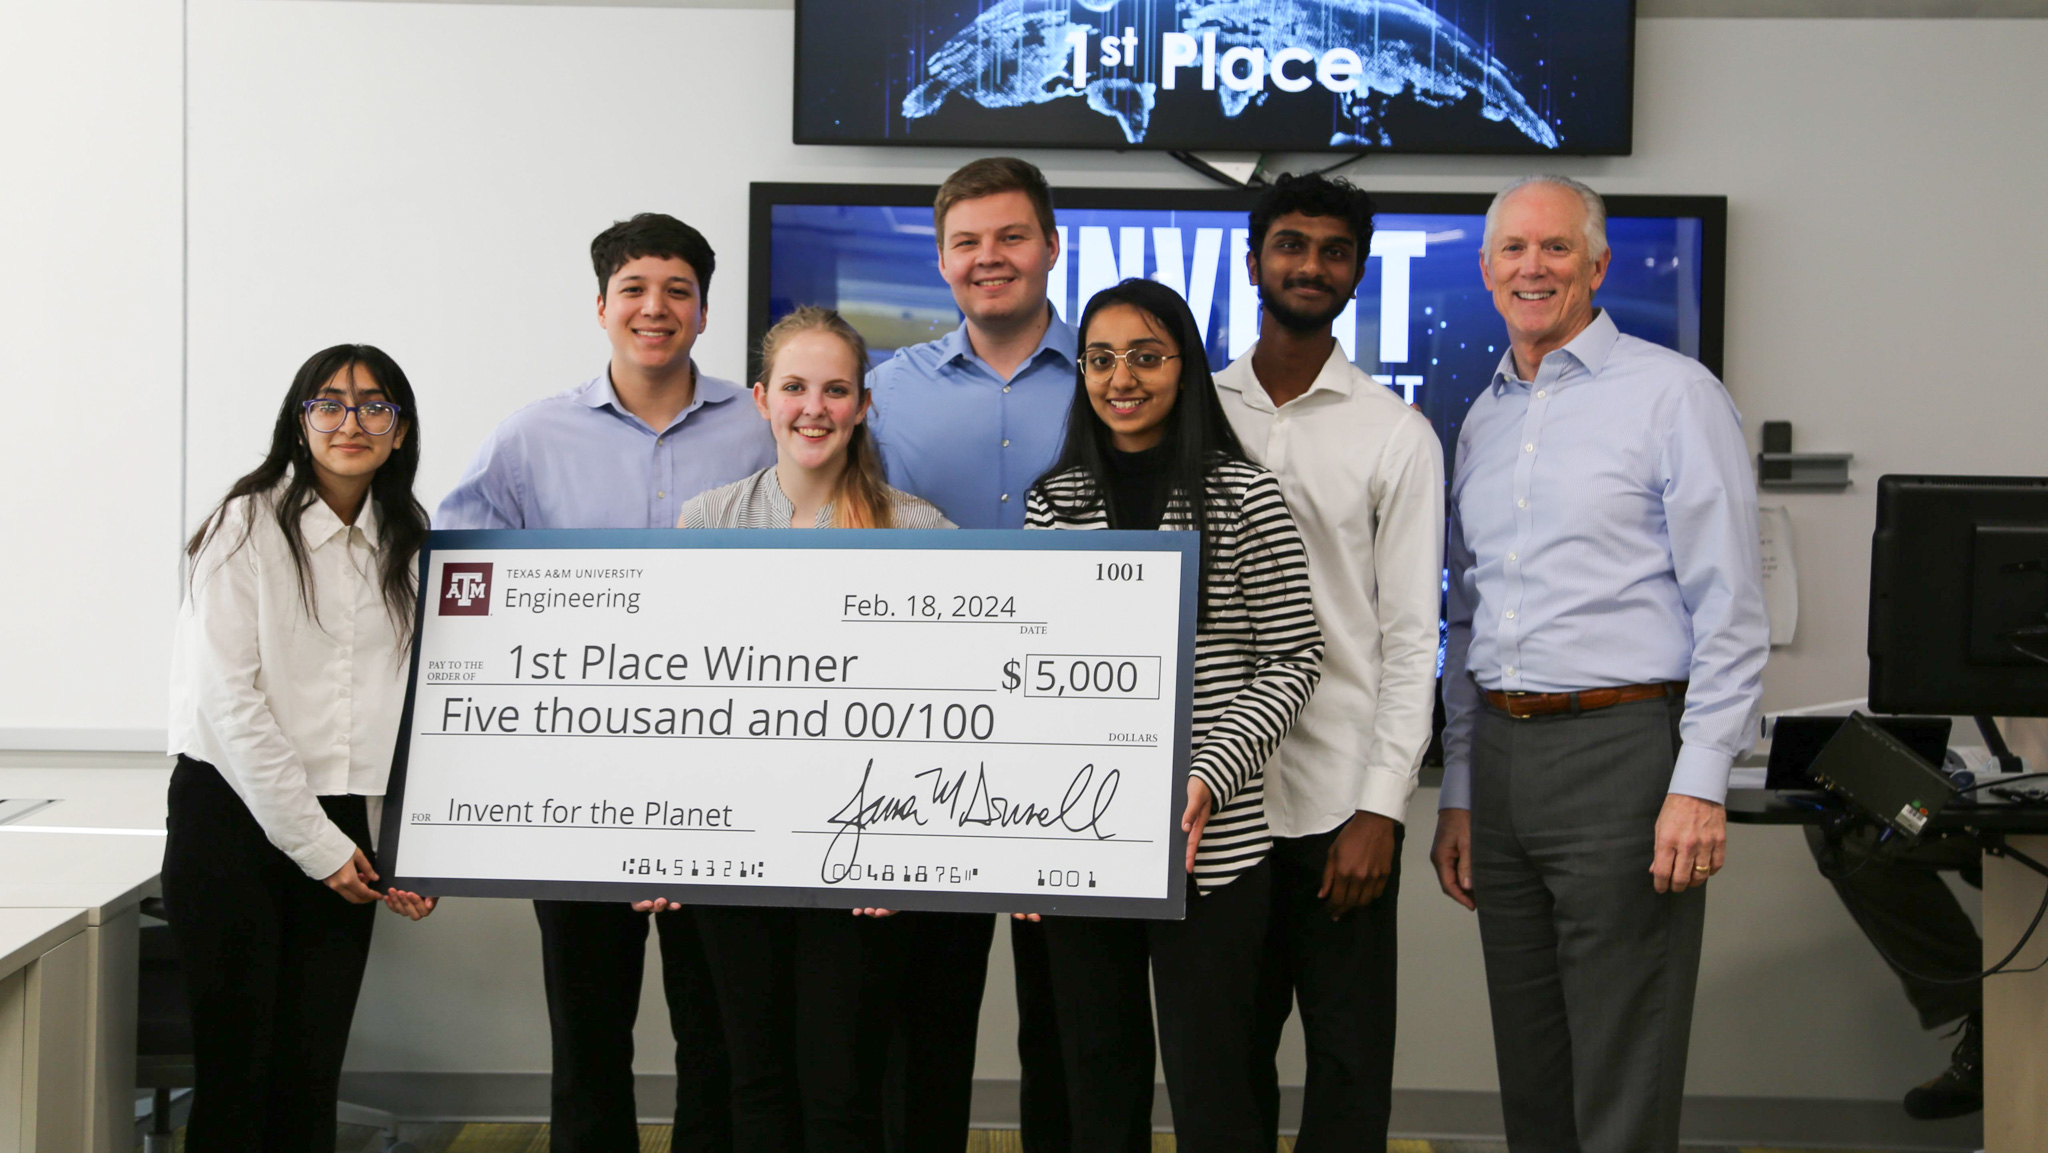 Team Water Wise being presented a jumbo check for first place with a grand prize of $5,000.